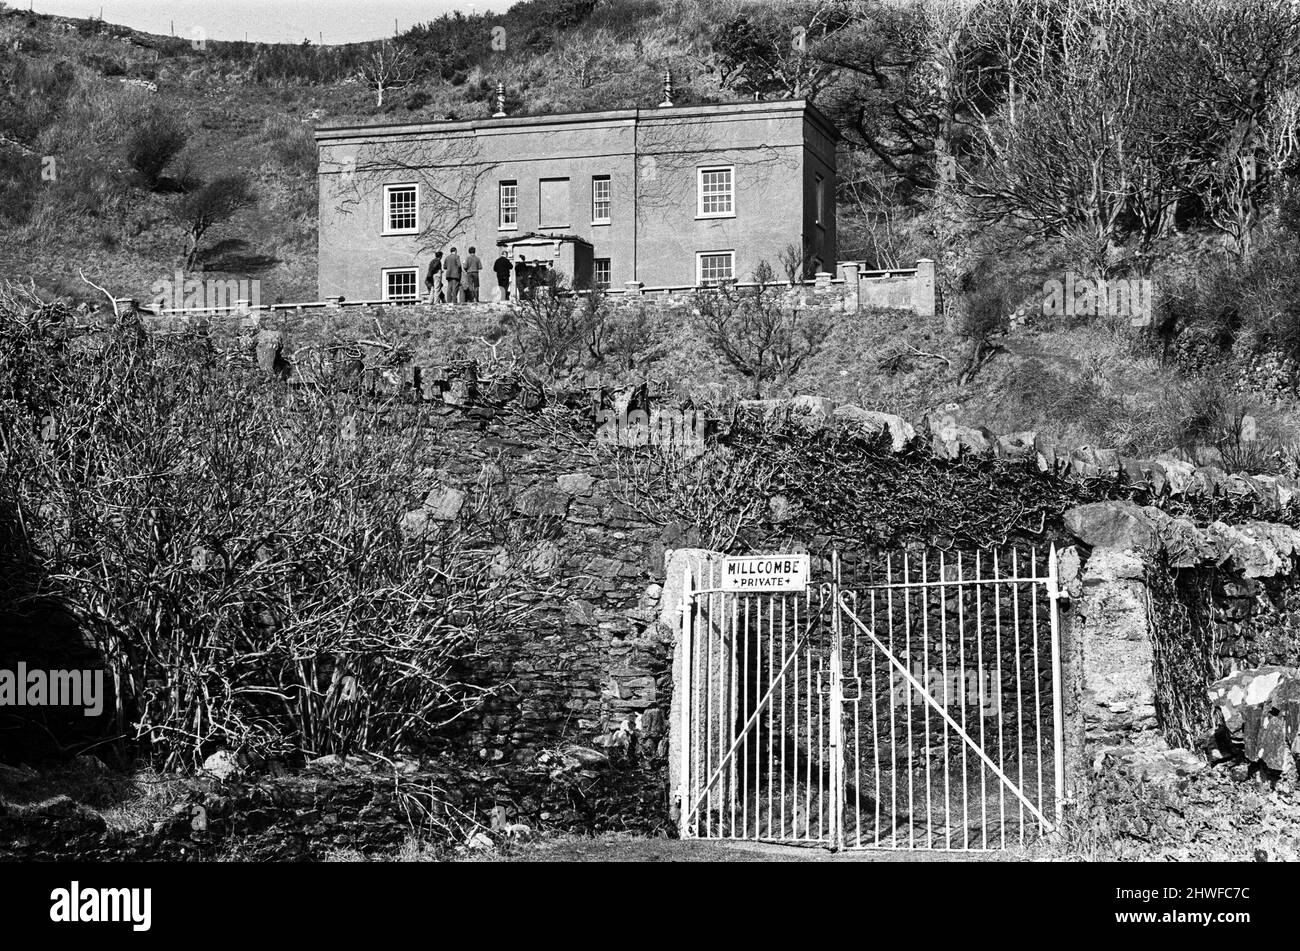 General scenes on Lundy Island. Lundy is the largest island in the Bristol Channel. It lies 12 miles off the coast of Devon. 4th April 1969. Stock Photo